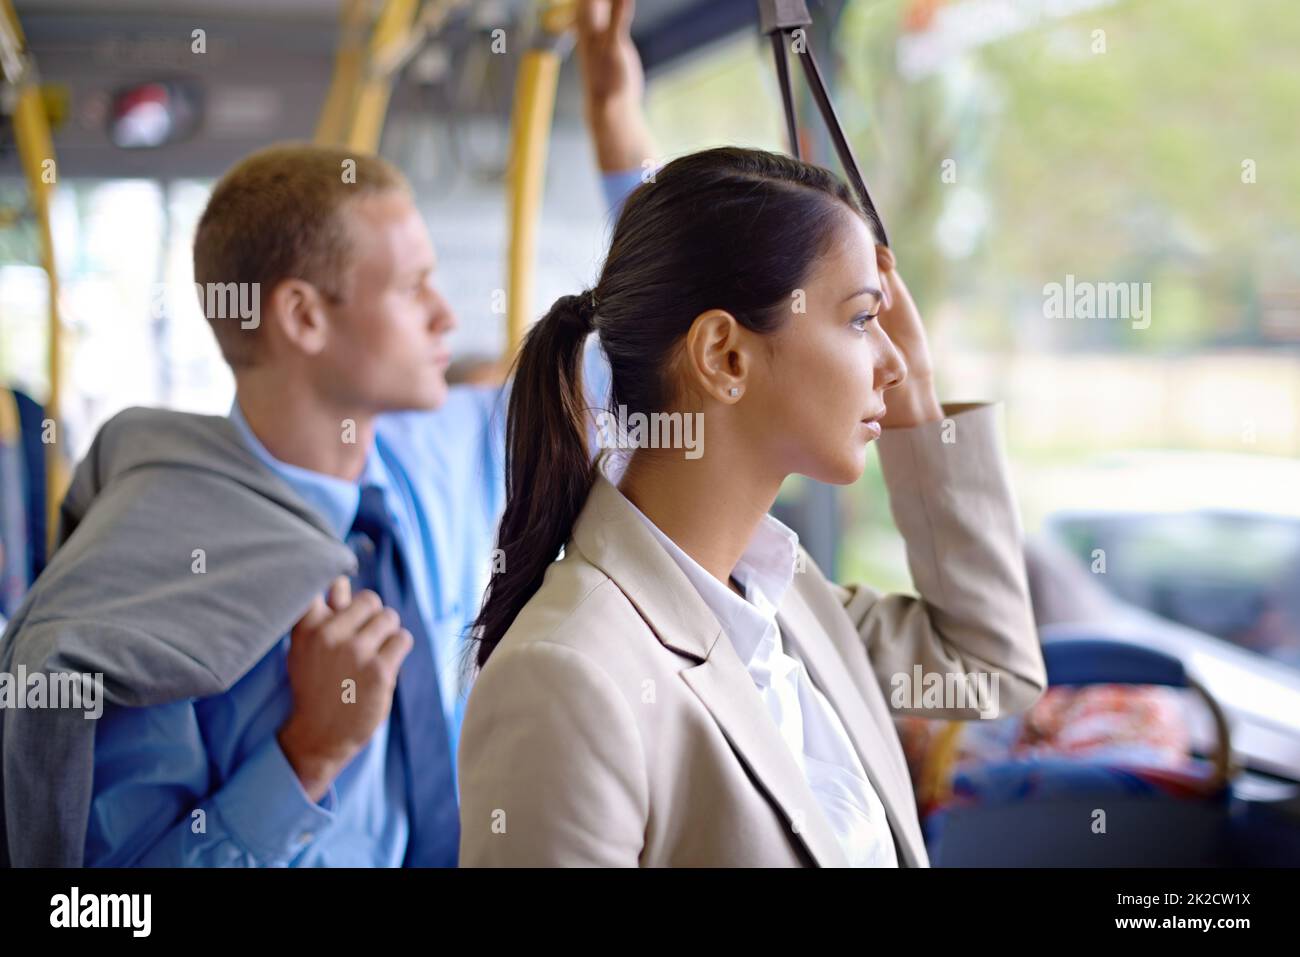 This is their daily commute to work. Shot of young business people commuting to work. Stock Photo